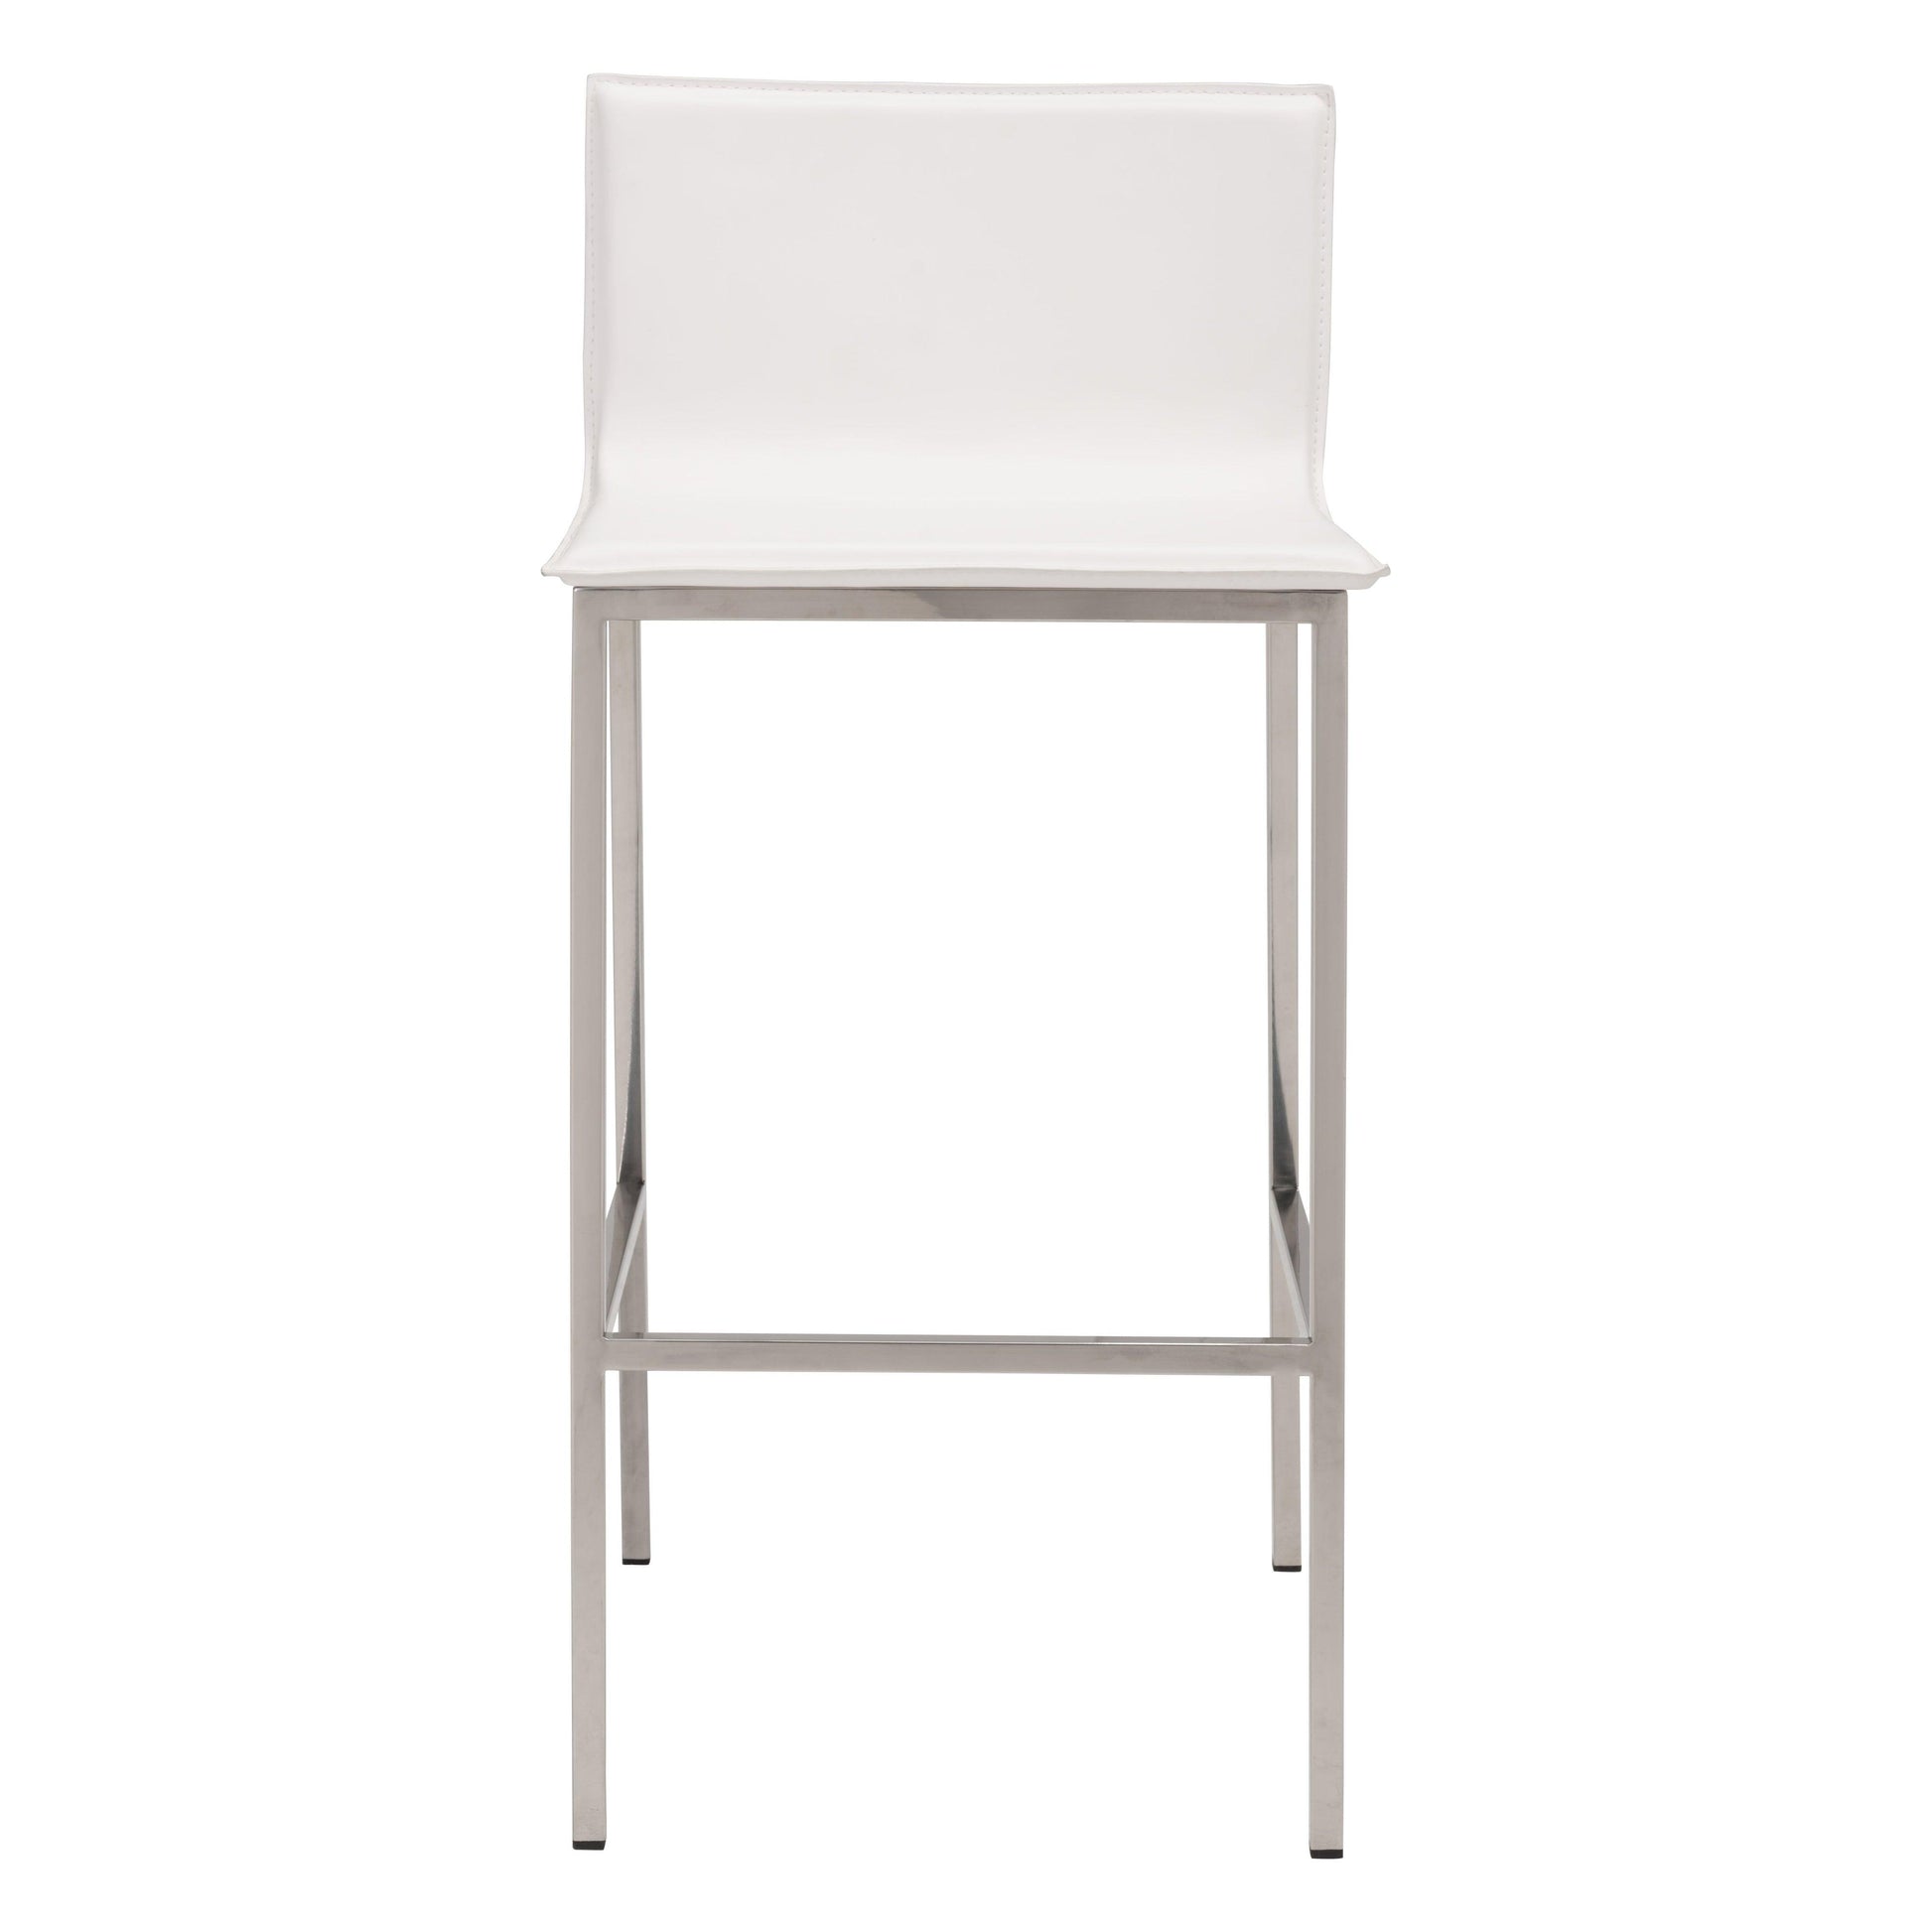 Marina Barstool (Set of 2) White - Sideboards and Things Back Type_With Back, Brand_Zuo Modern, Color_Silver, Color_White, Depth_20-30, Height_30-40, Materials_Metal, Materials_Upholstery, Metal Type_Steel, Number of Pieces_2PC Set, Product Type_Bar Height, Upholstery Type_Leather, Upholstery Type_Vegan Leather, Width_10-20